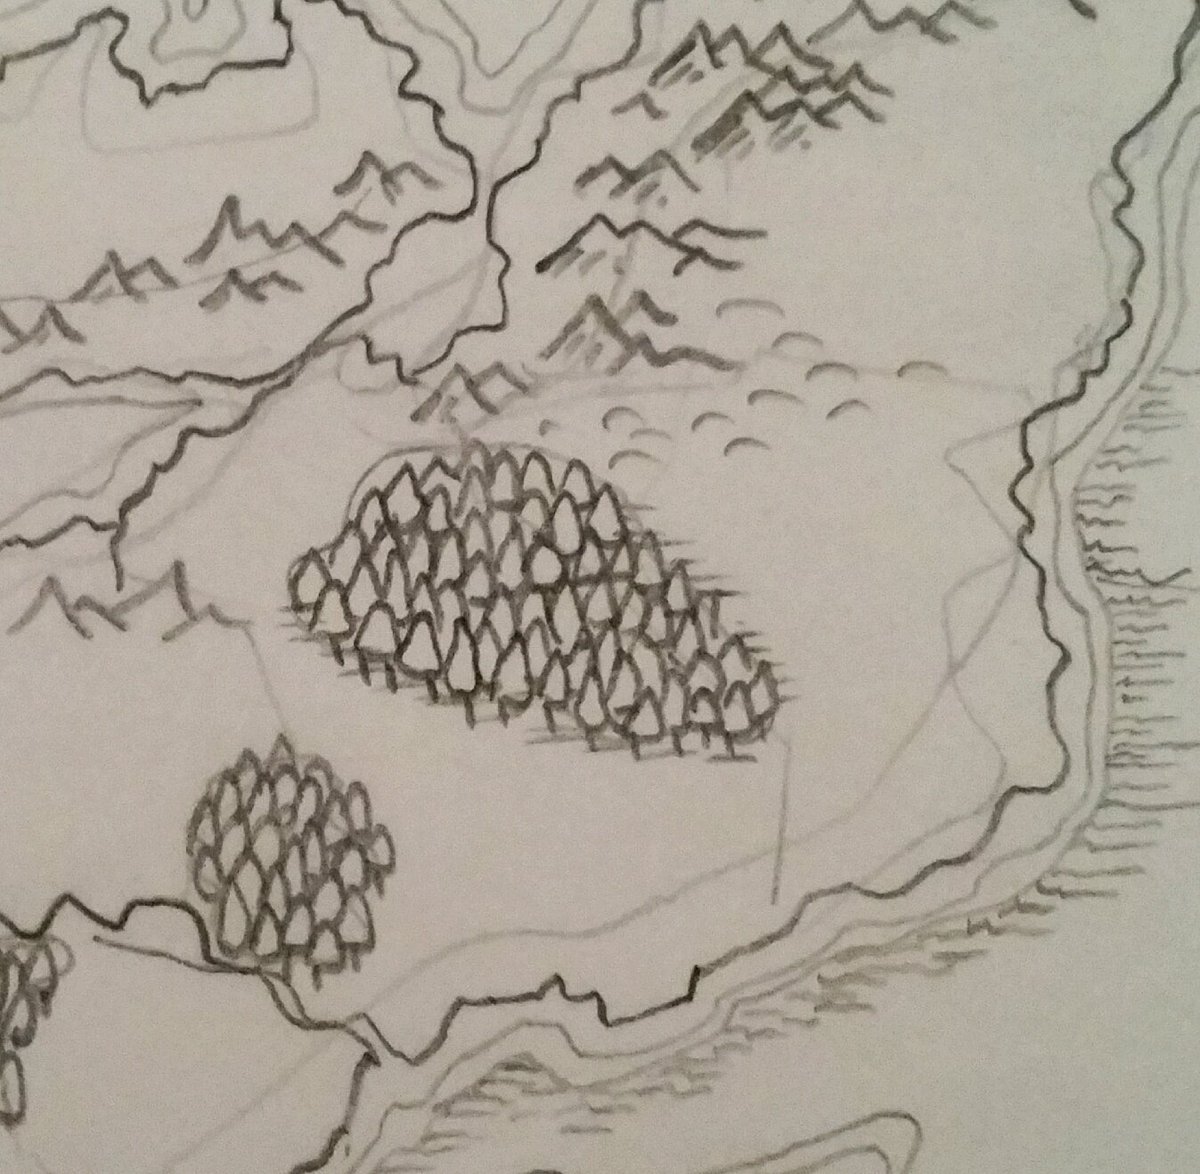 List 100+ Images how to draw a forest on a map Sharp